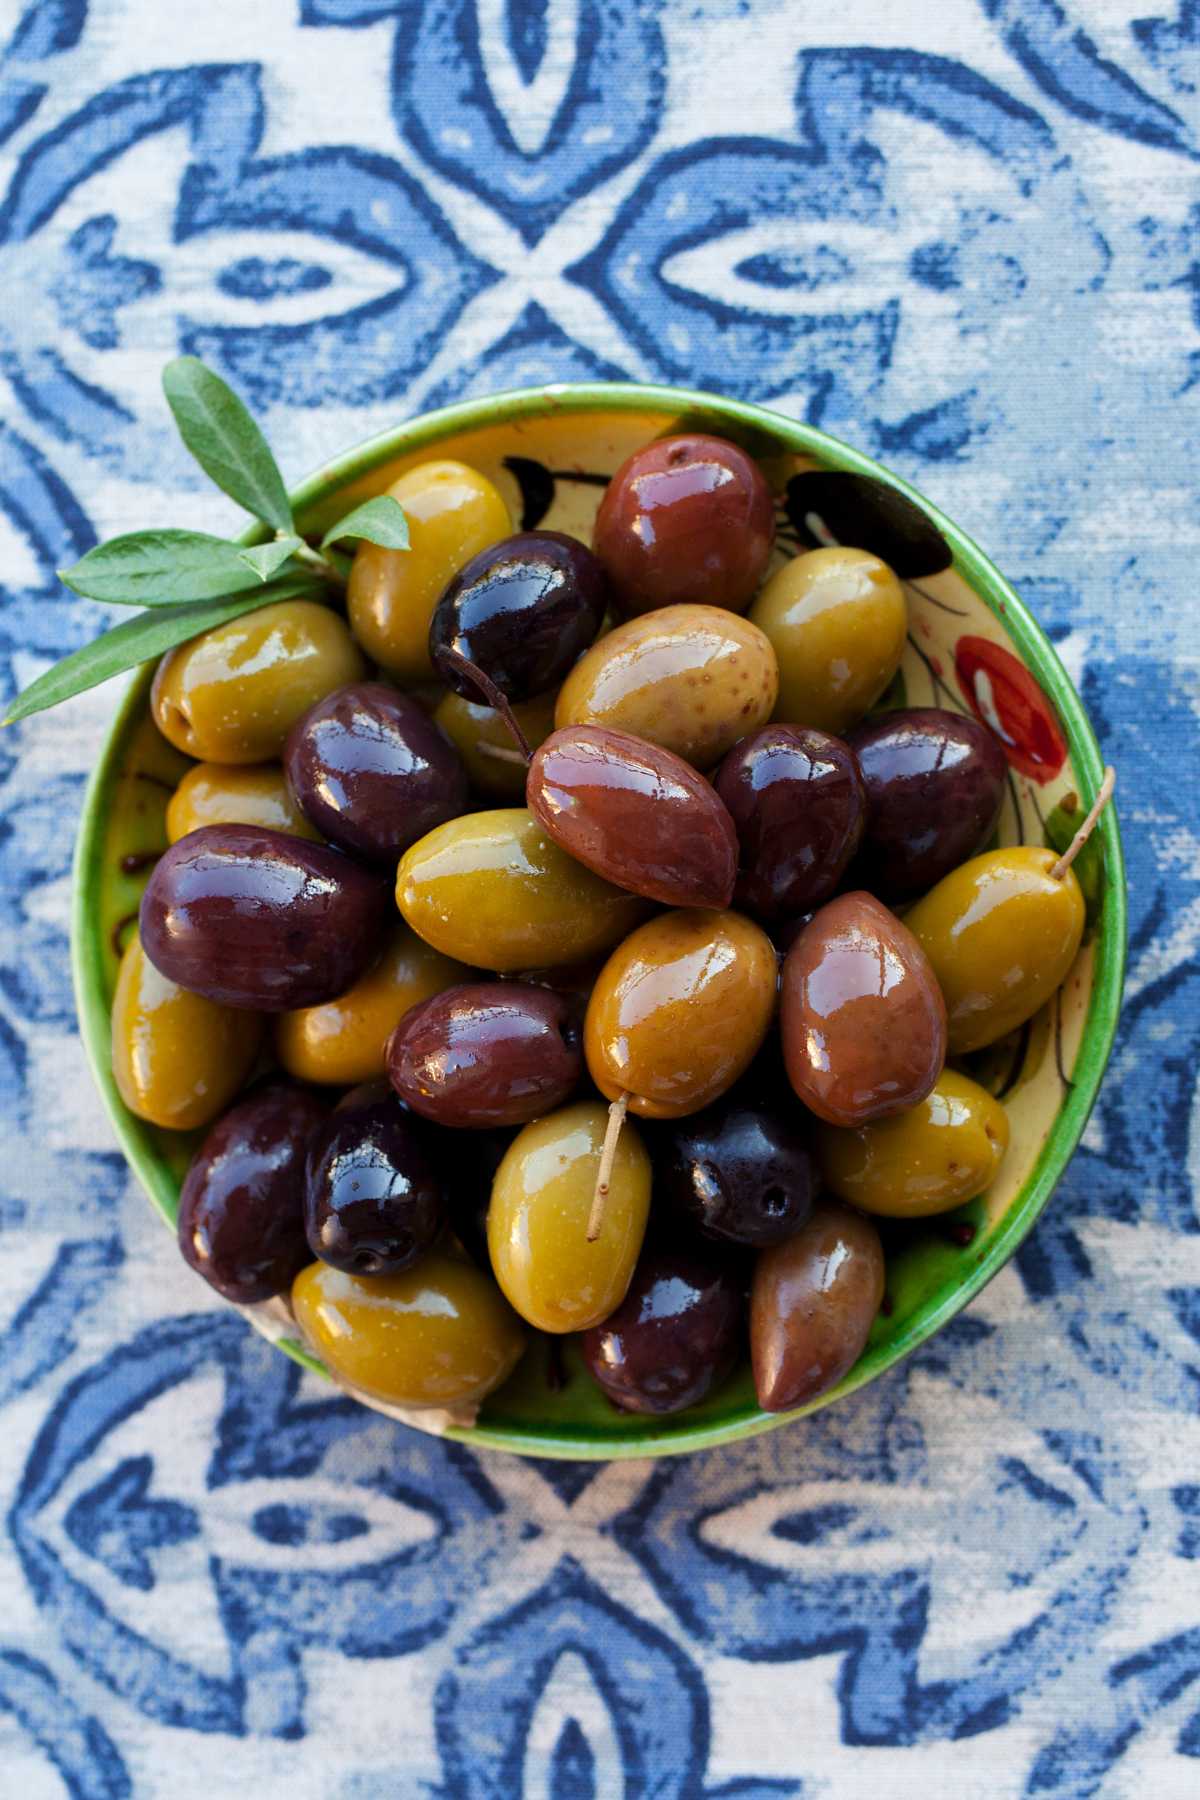 Are Olives Keto? How many carbs and net carbs in olives? With many nutritional benefits and loads of great taste, you may be wondering if olives have a place in your new ketogenic lifestyle. Should you limit your olive intake?